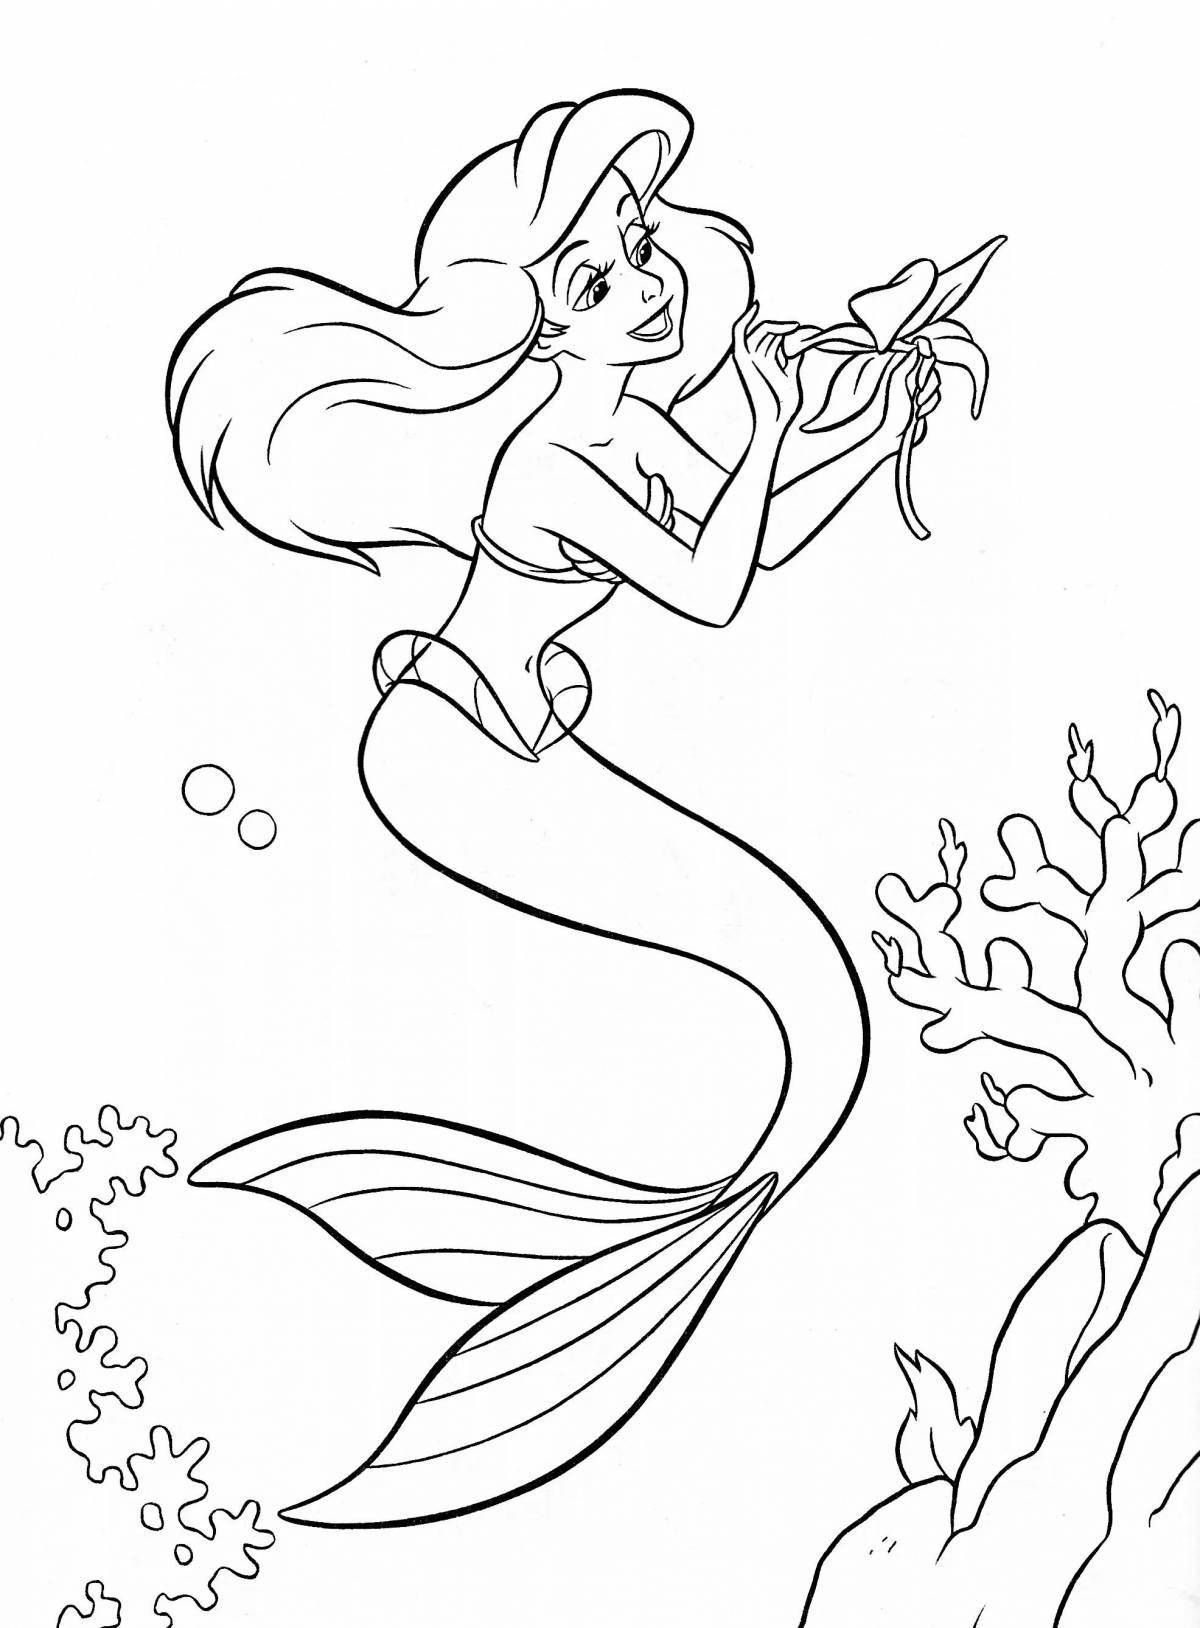 Whimsical coloring book for kids with disney princesses